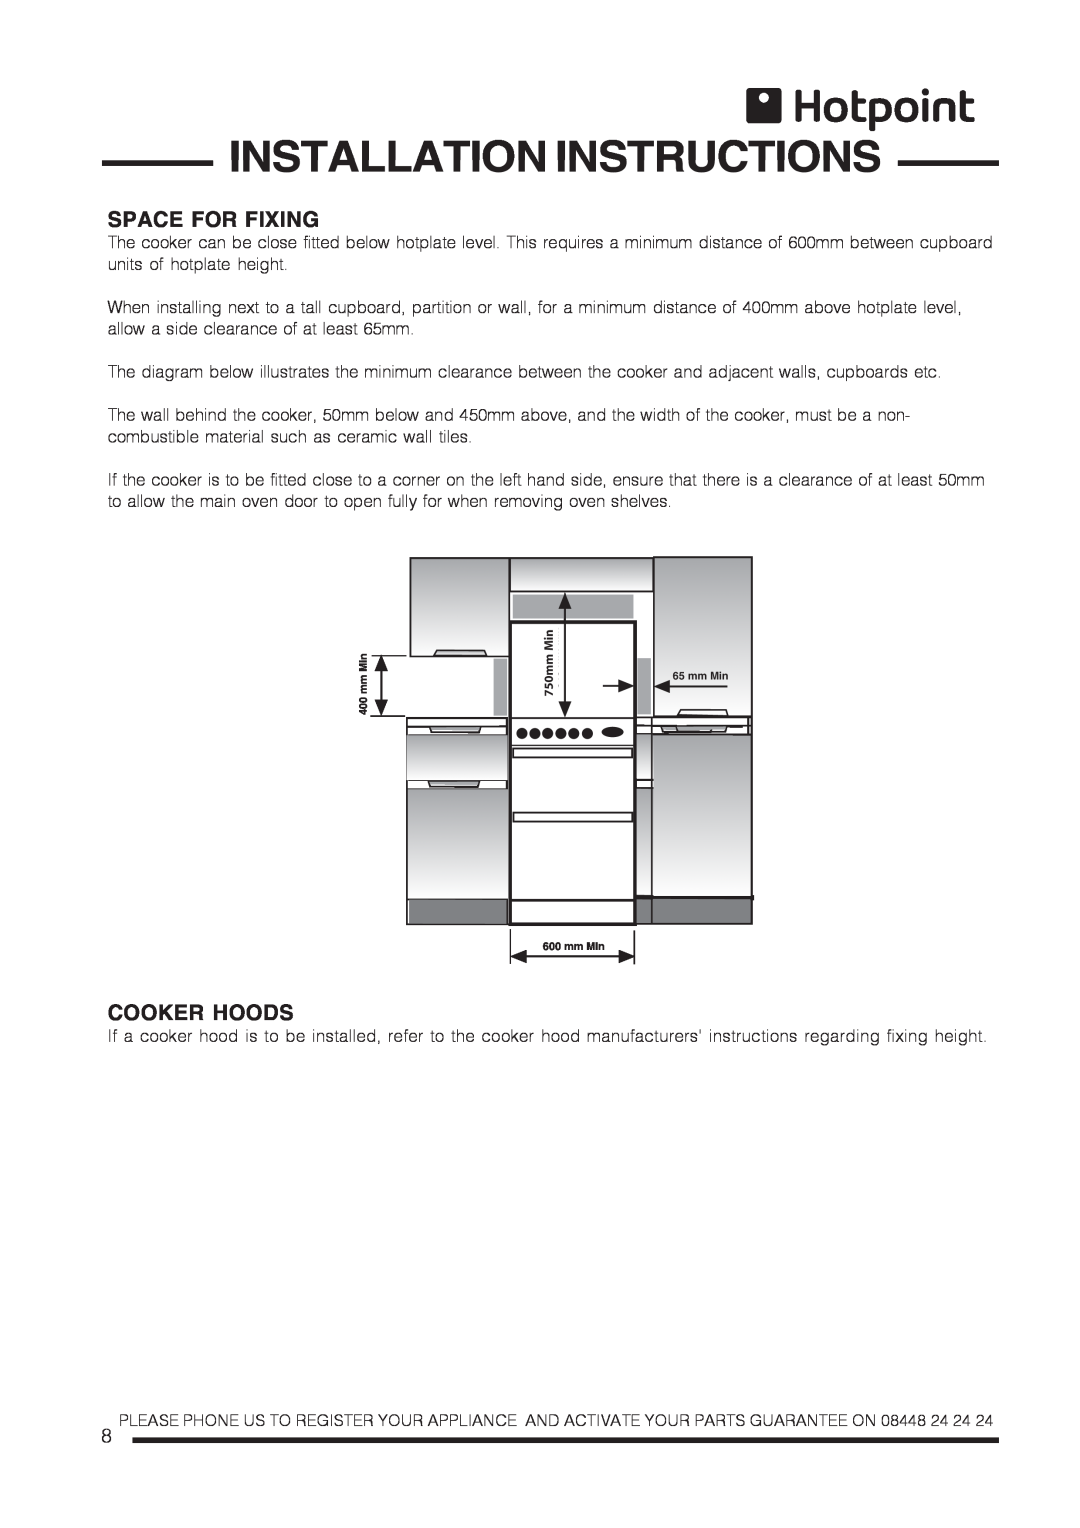 Hotpoint CH60GTCF, CH60GTXF installation instructions Space For Fixing, Cooker Hoods, Installation Instructions 